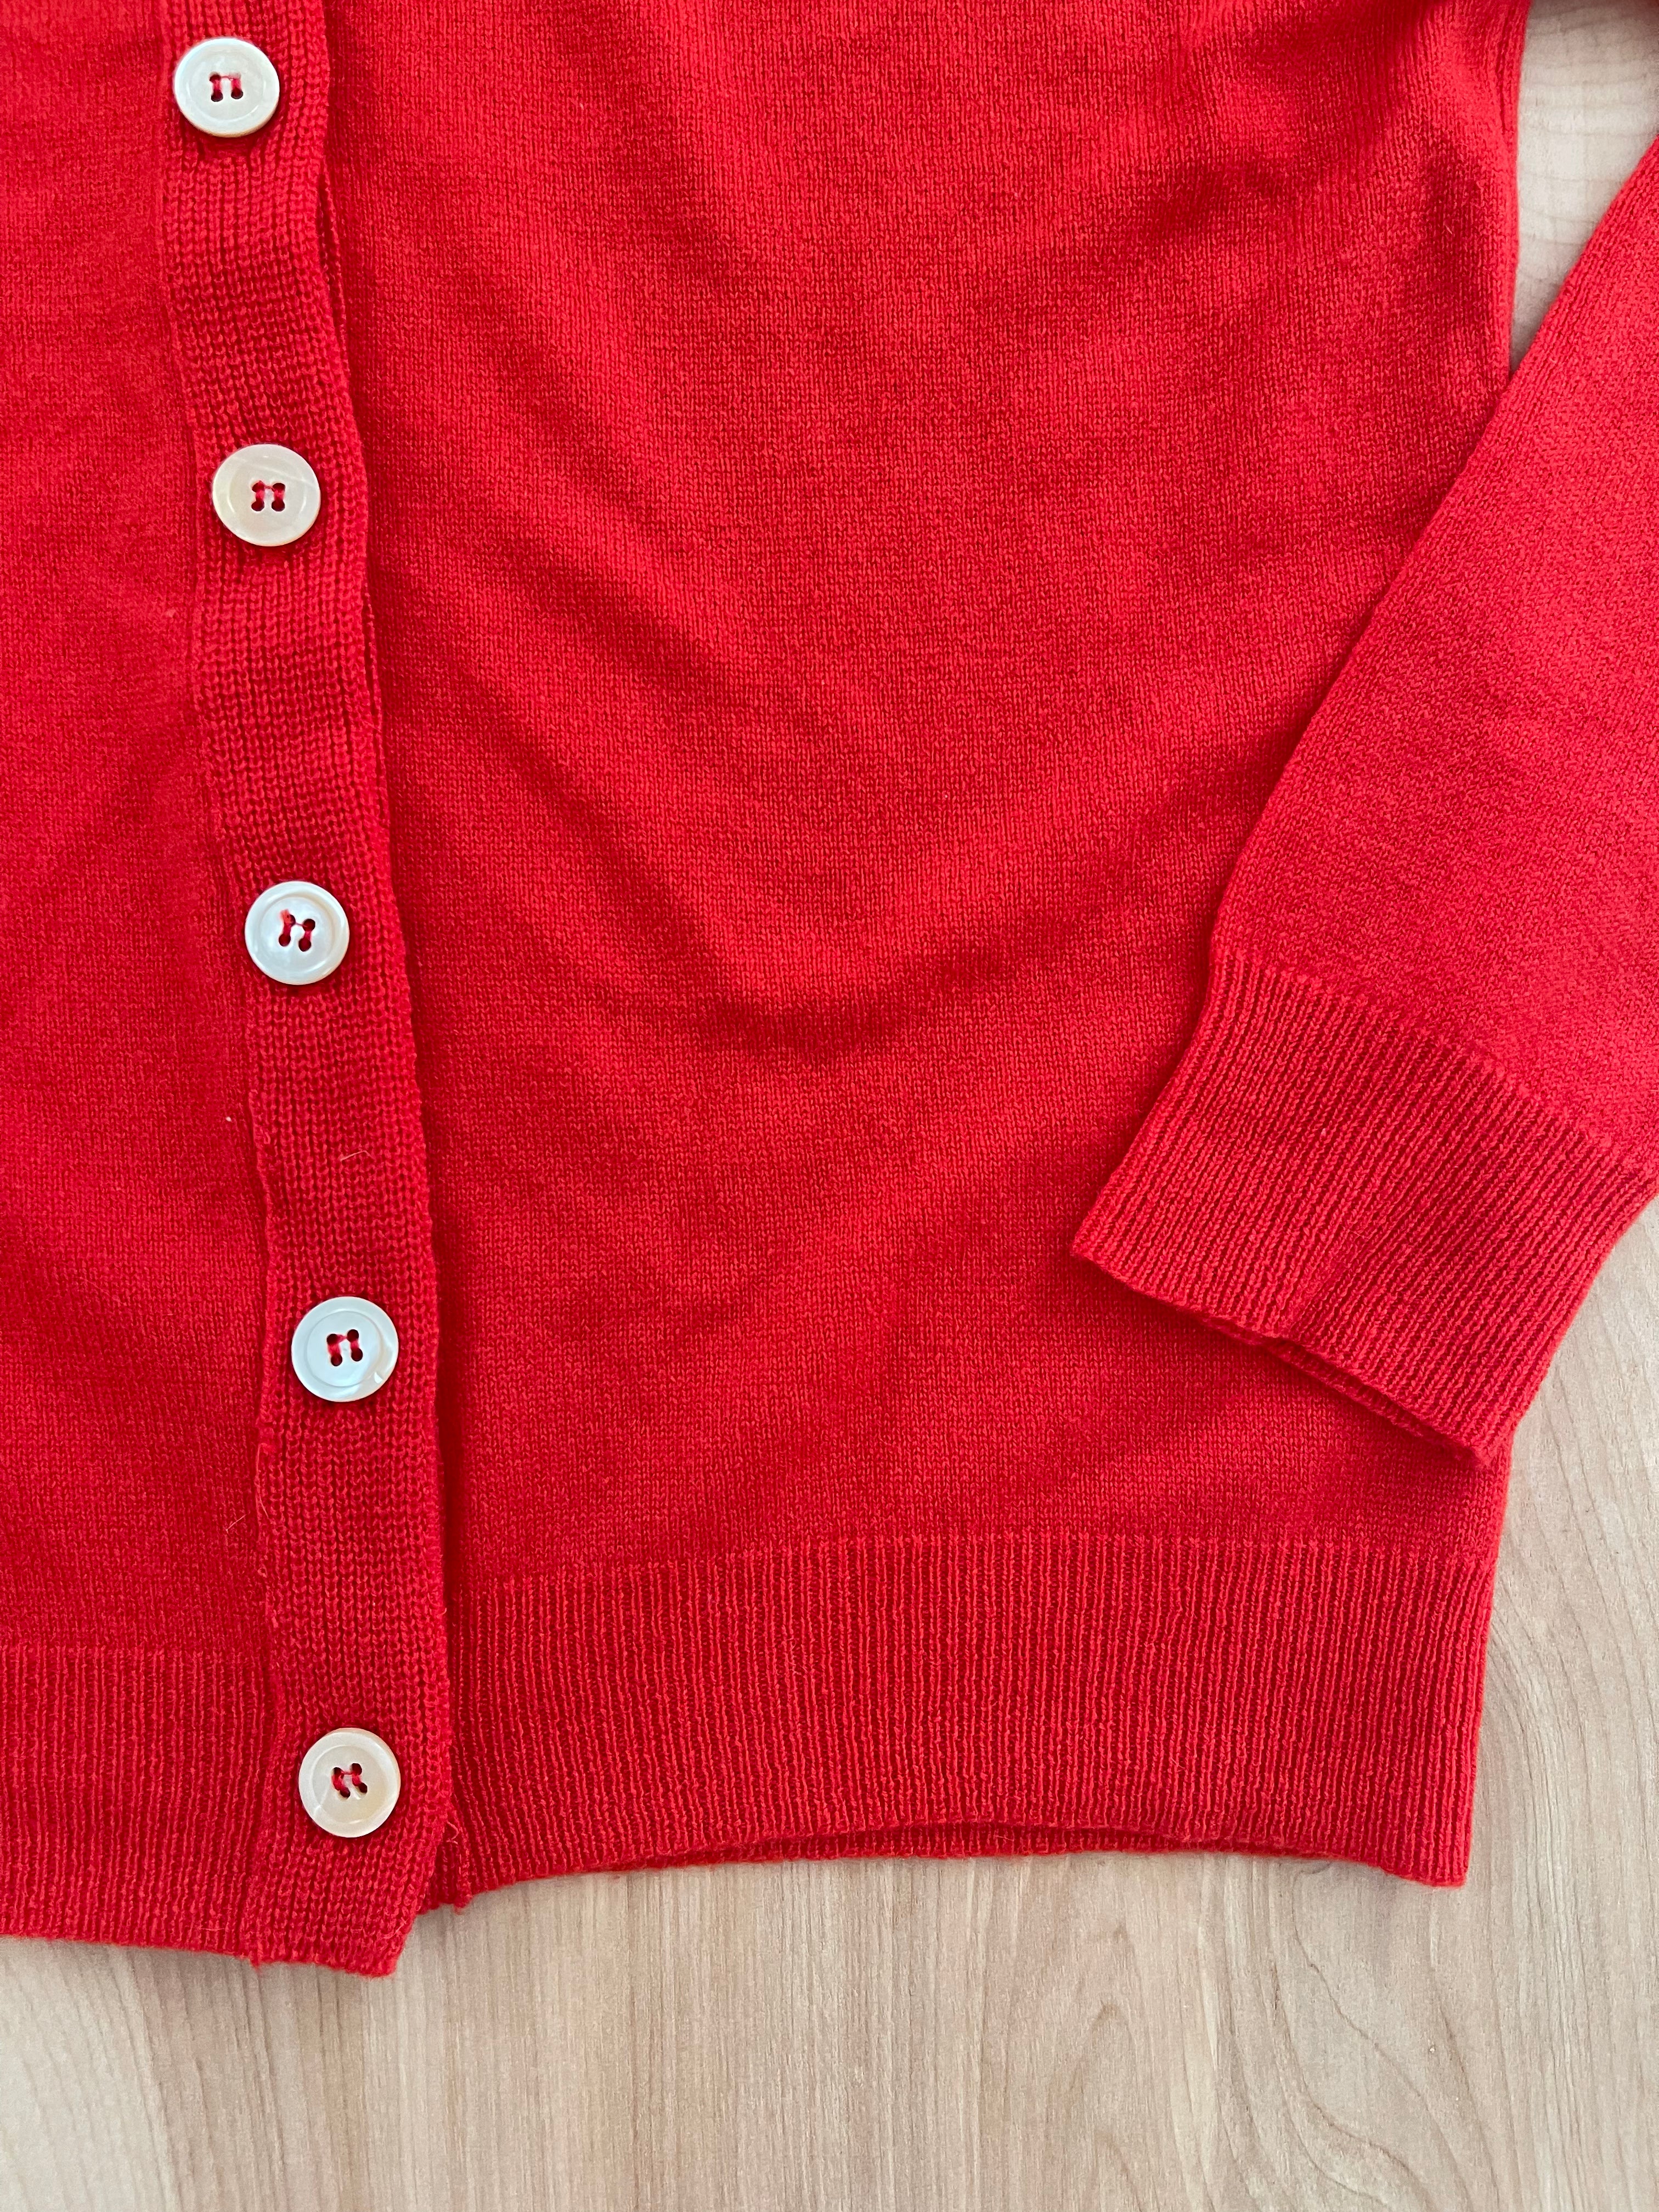 Red Button Up Sweater